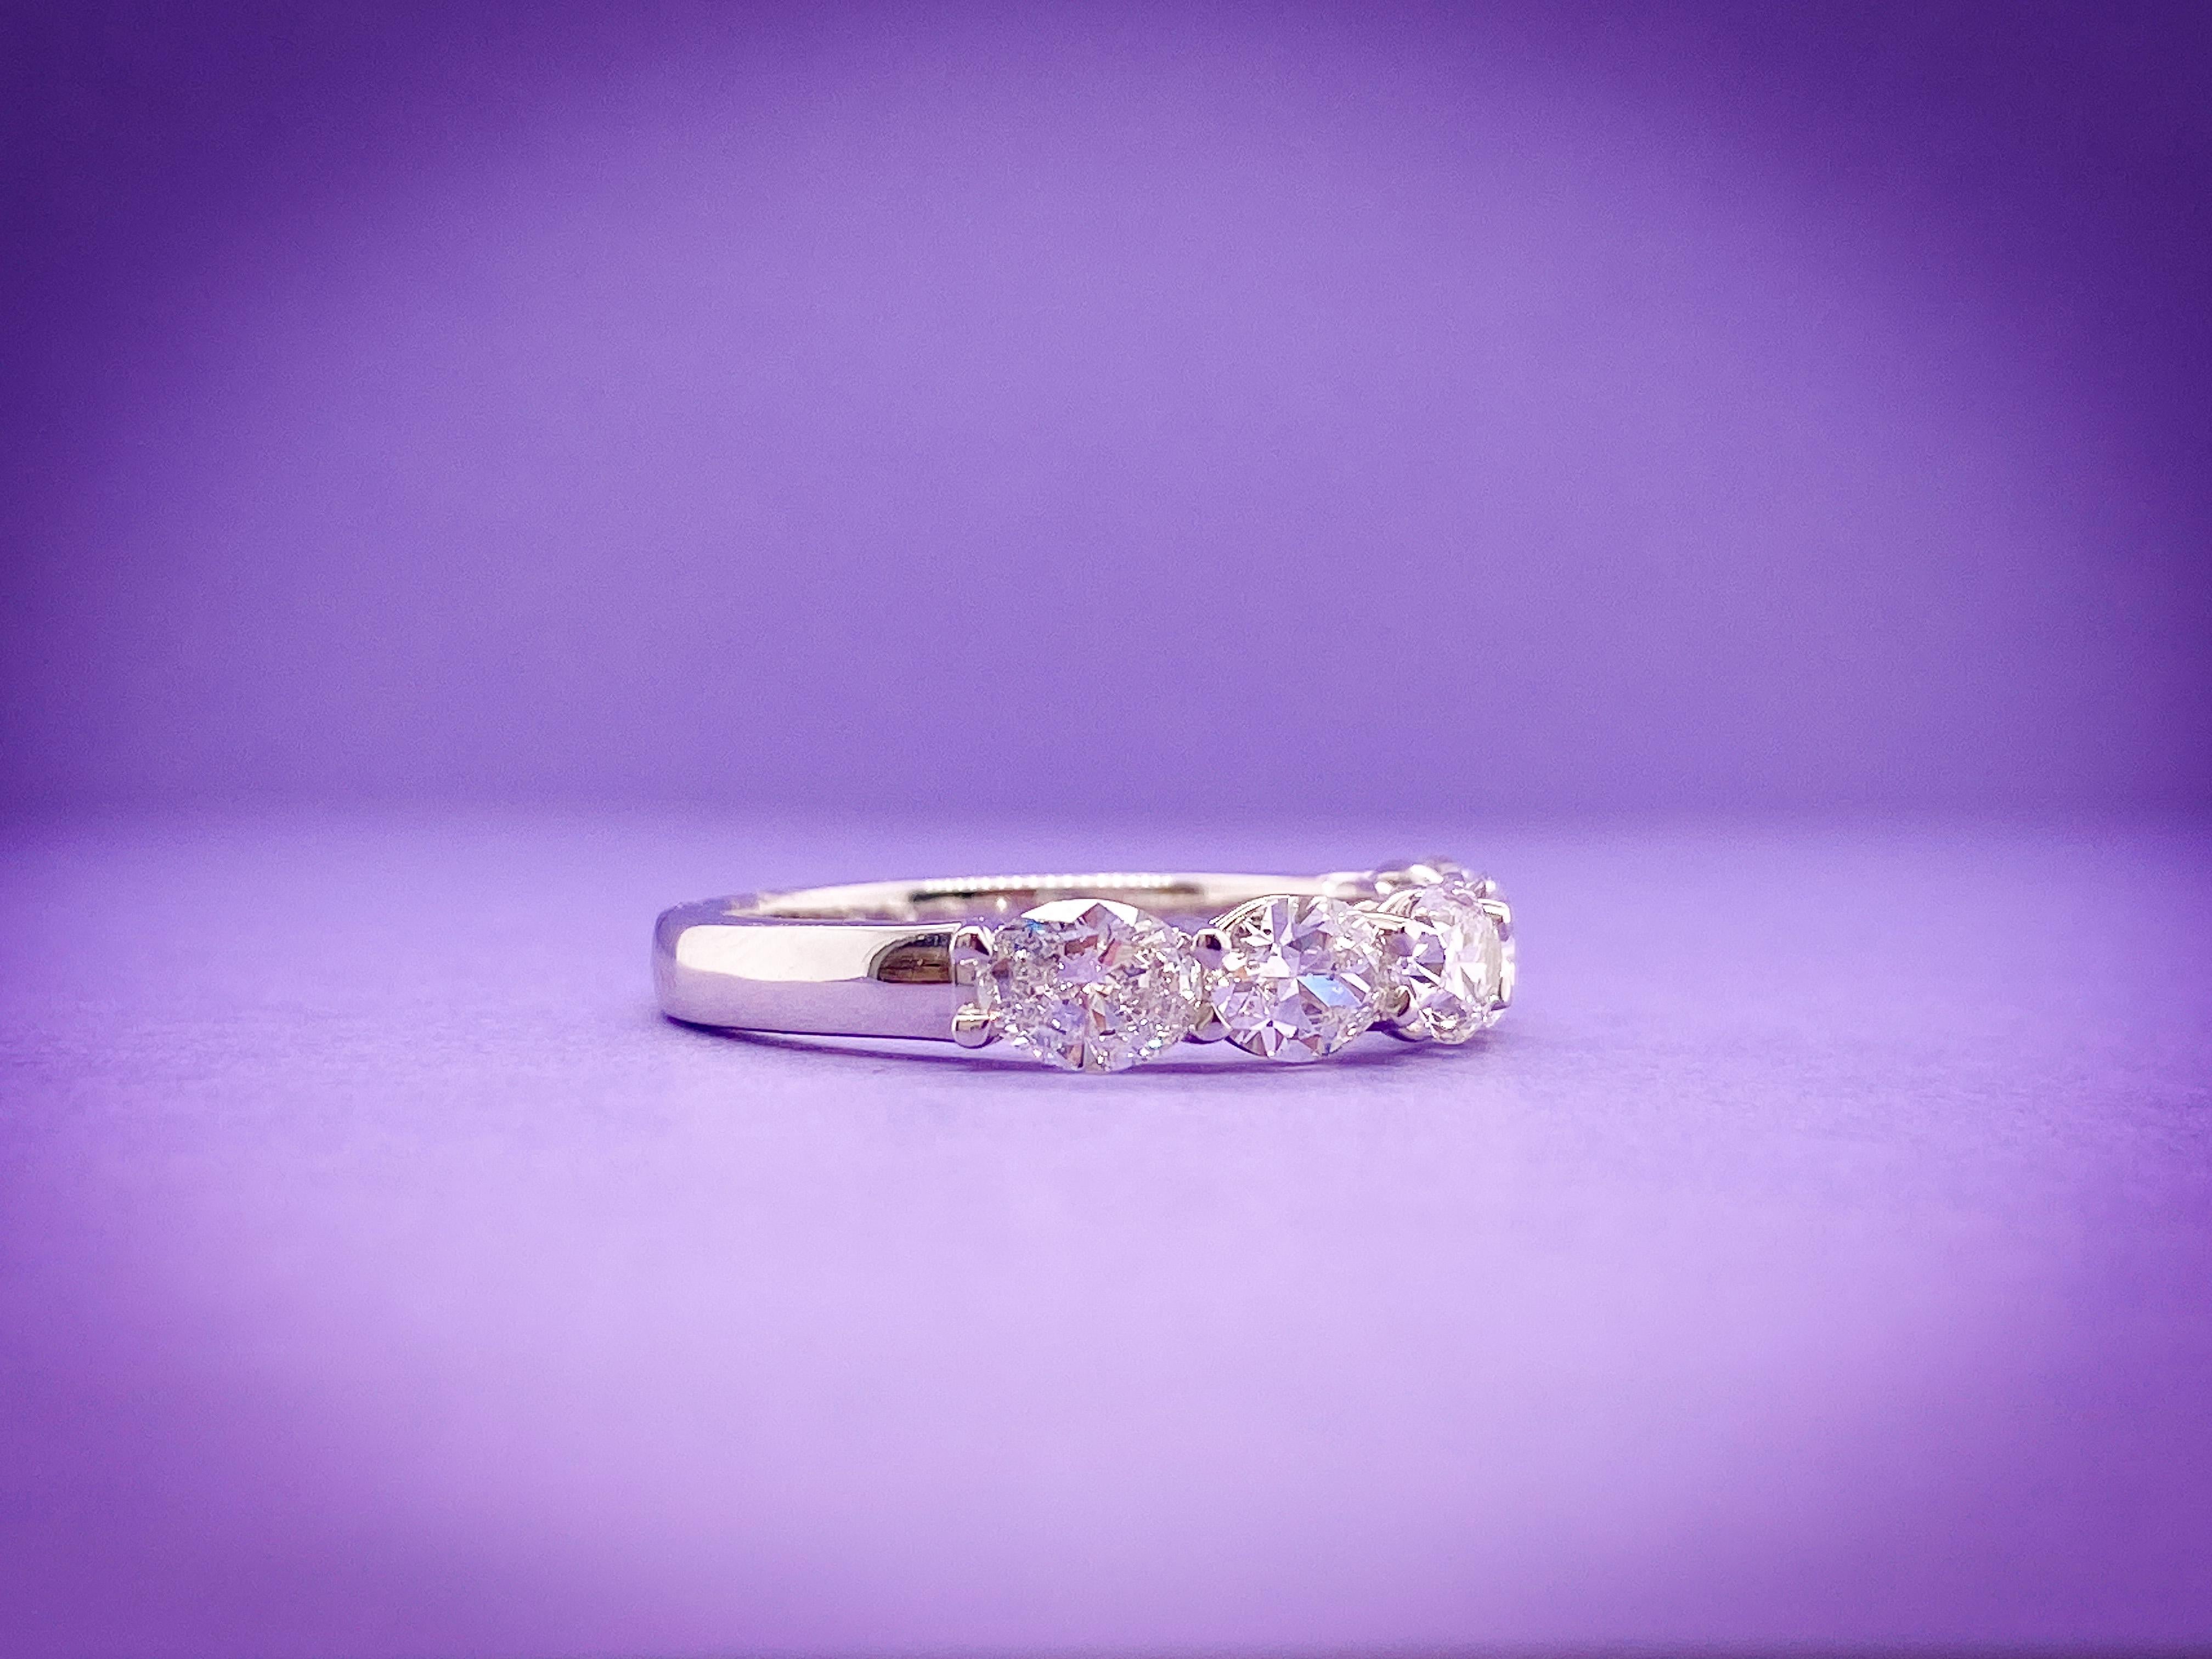 This 5 Stone Oval Partway Band sparkles and shimmers. The stones weighing 1.45 Total Carat Weight are F-G Color and SI Clarity, set in Platinum. The stones are set Horizontal for an added unique twist. 